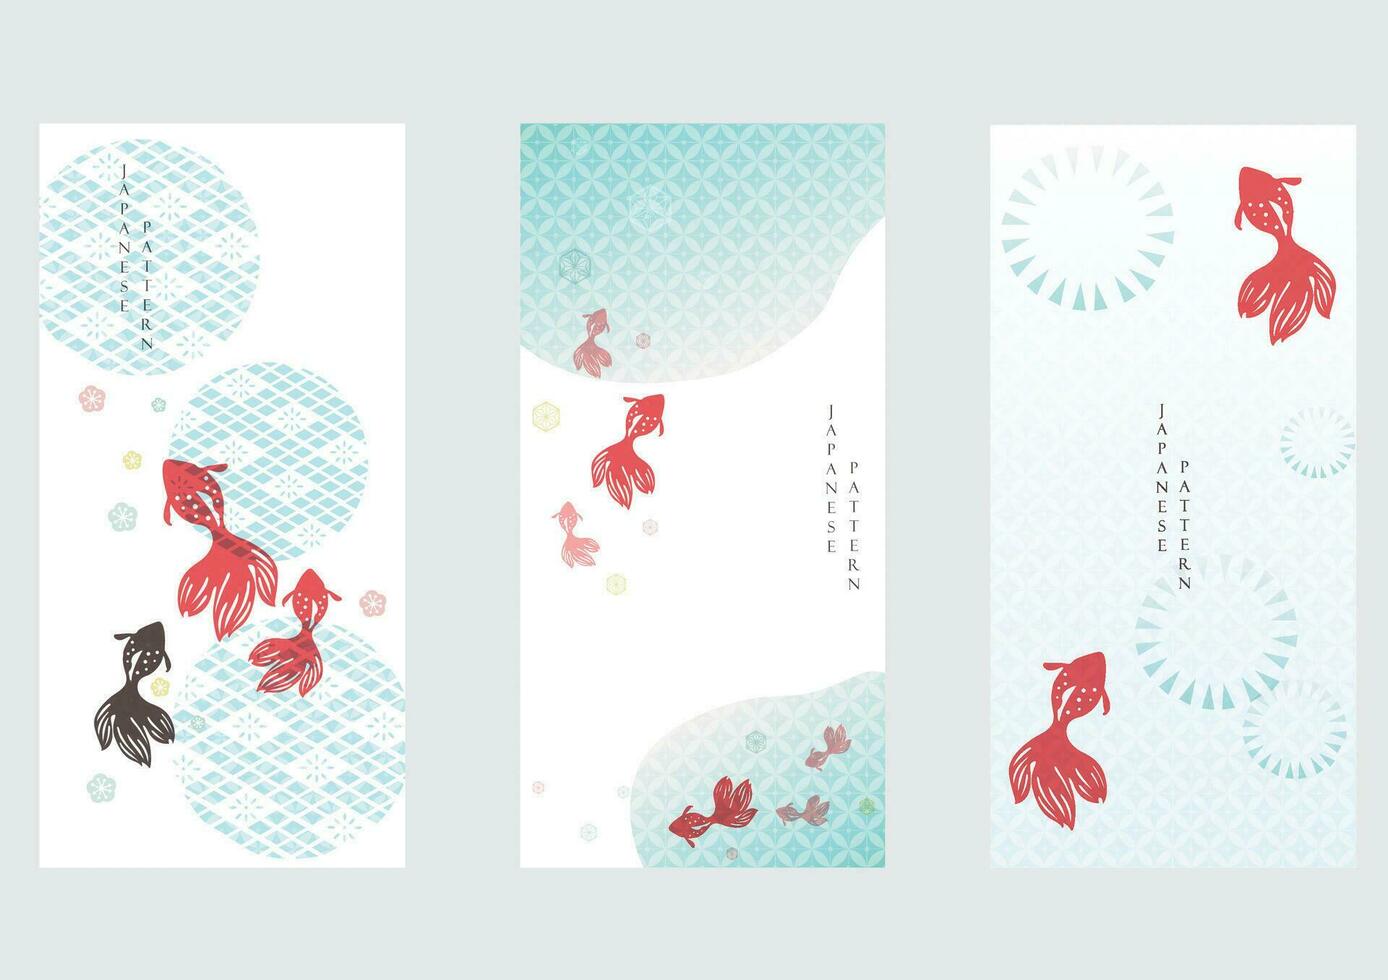 Japanese background with crap fish decoration pattern vector. Geometric banner design with abstract art elements New year card in vintage style. vector